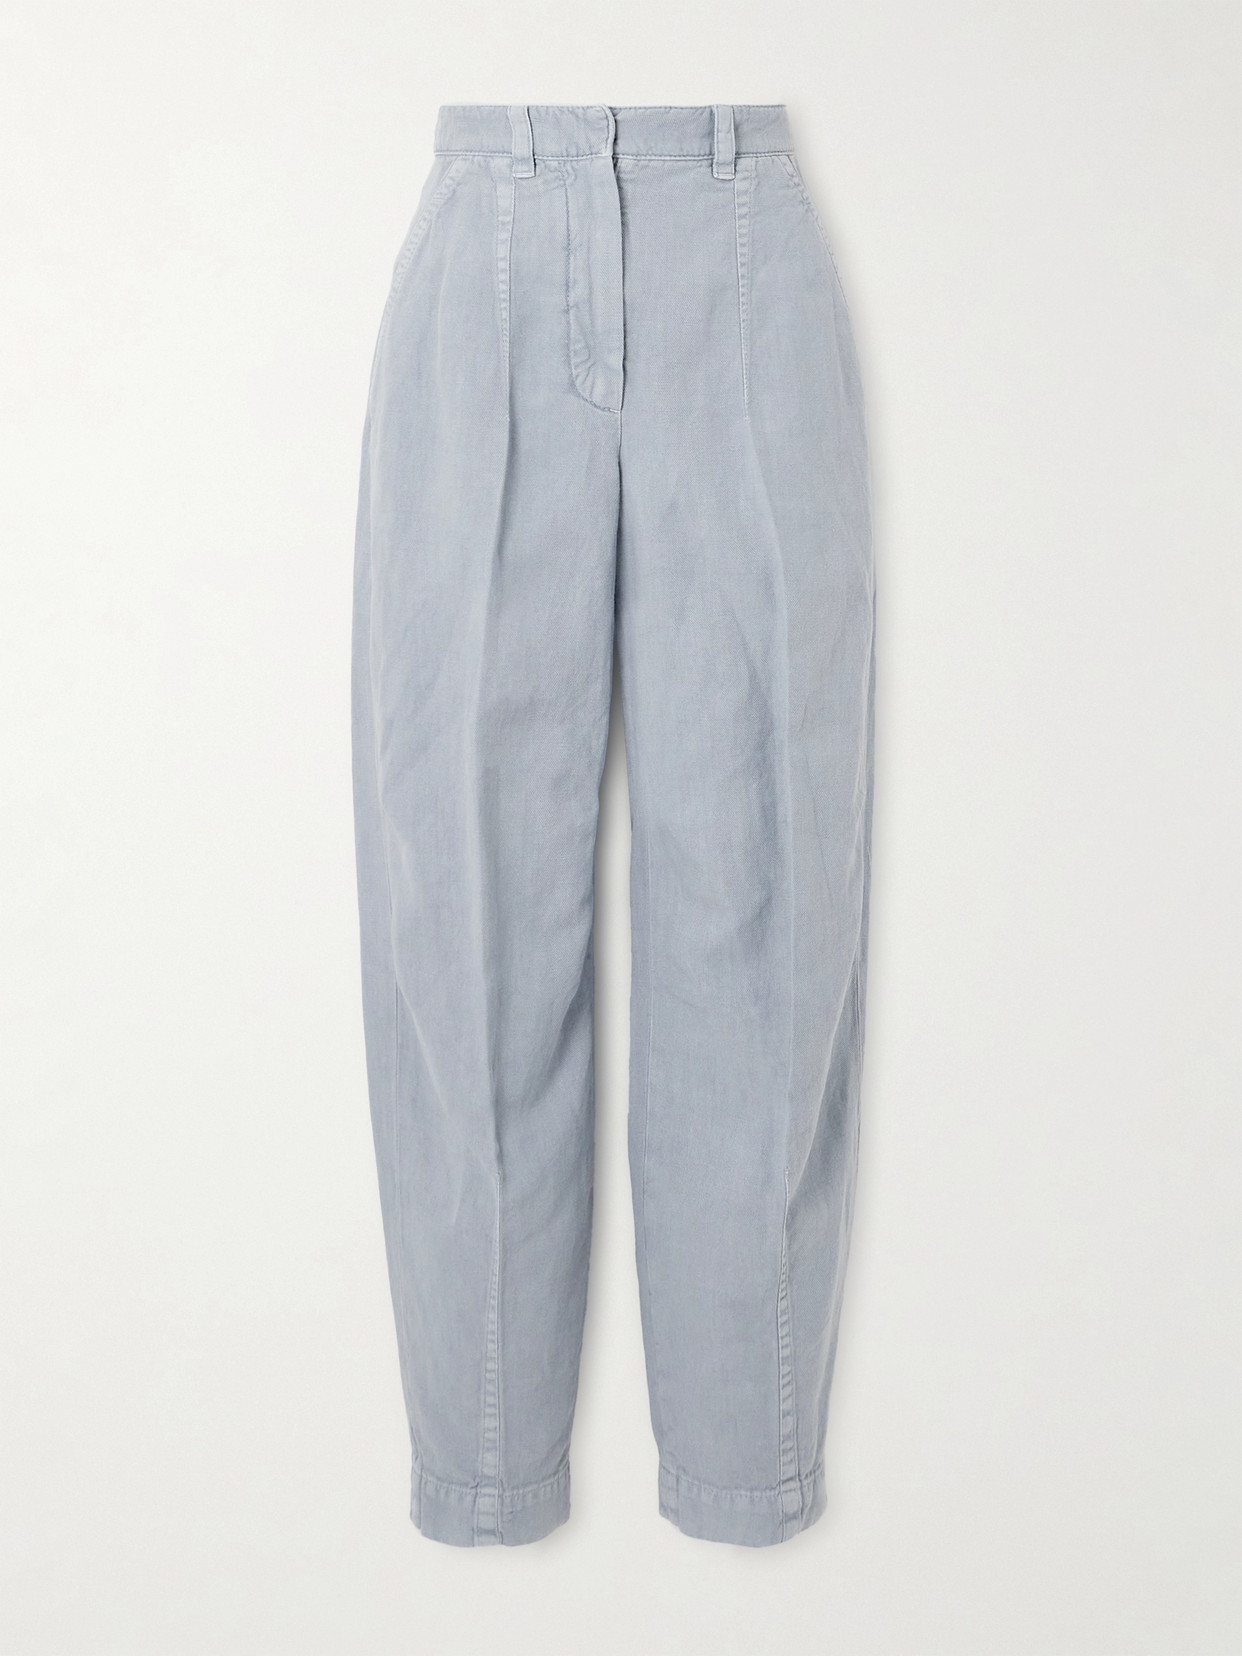 Cotton and Linen-Blend Twill Tapered Pants